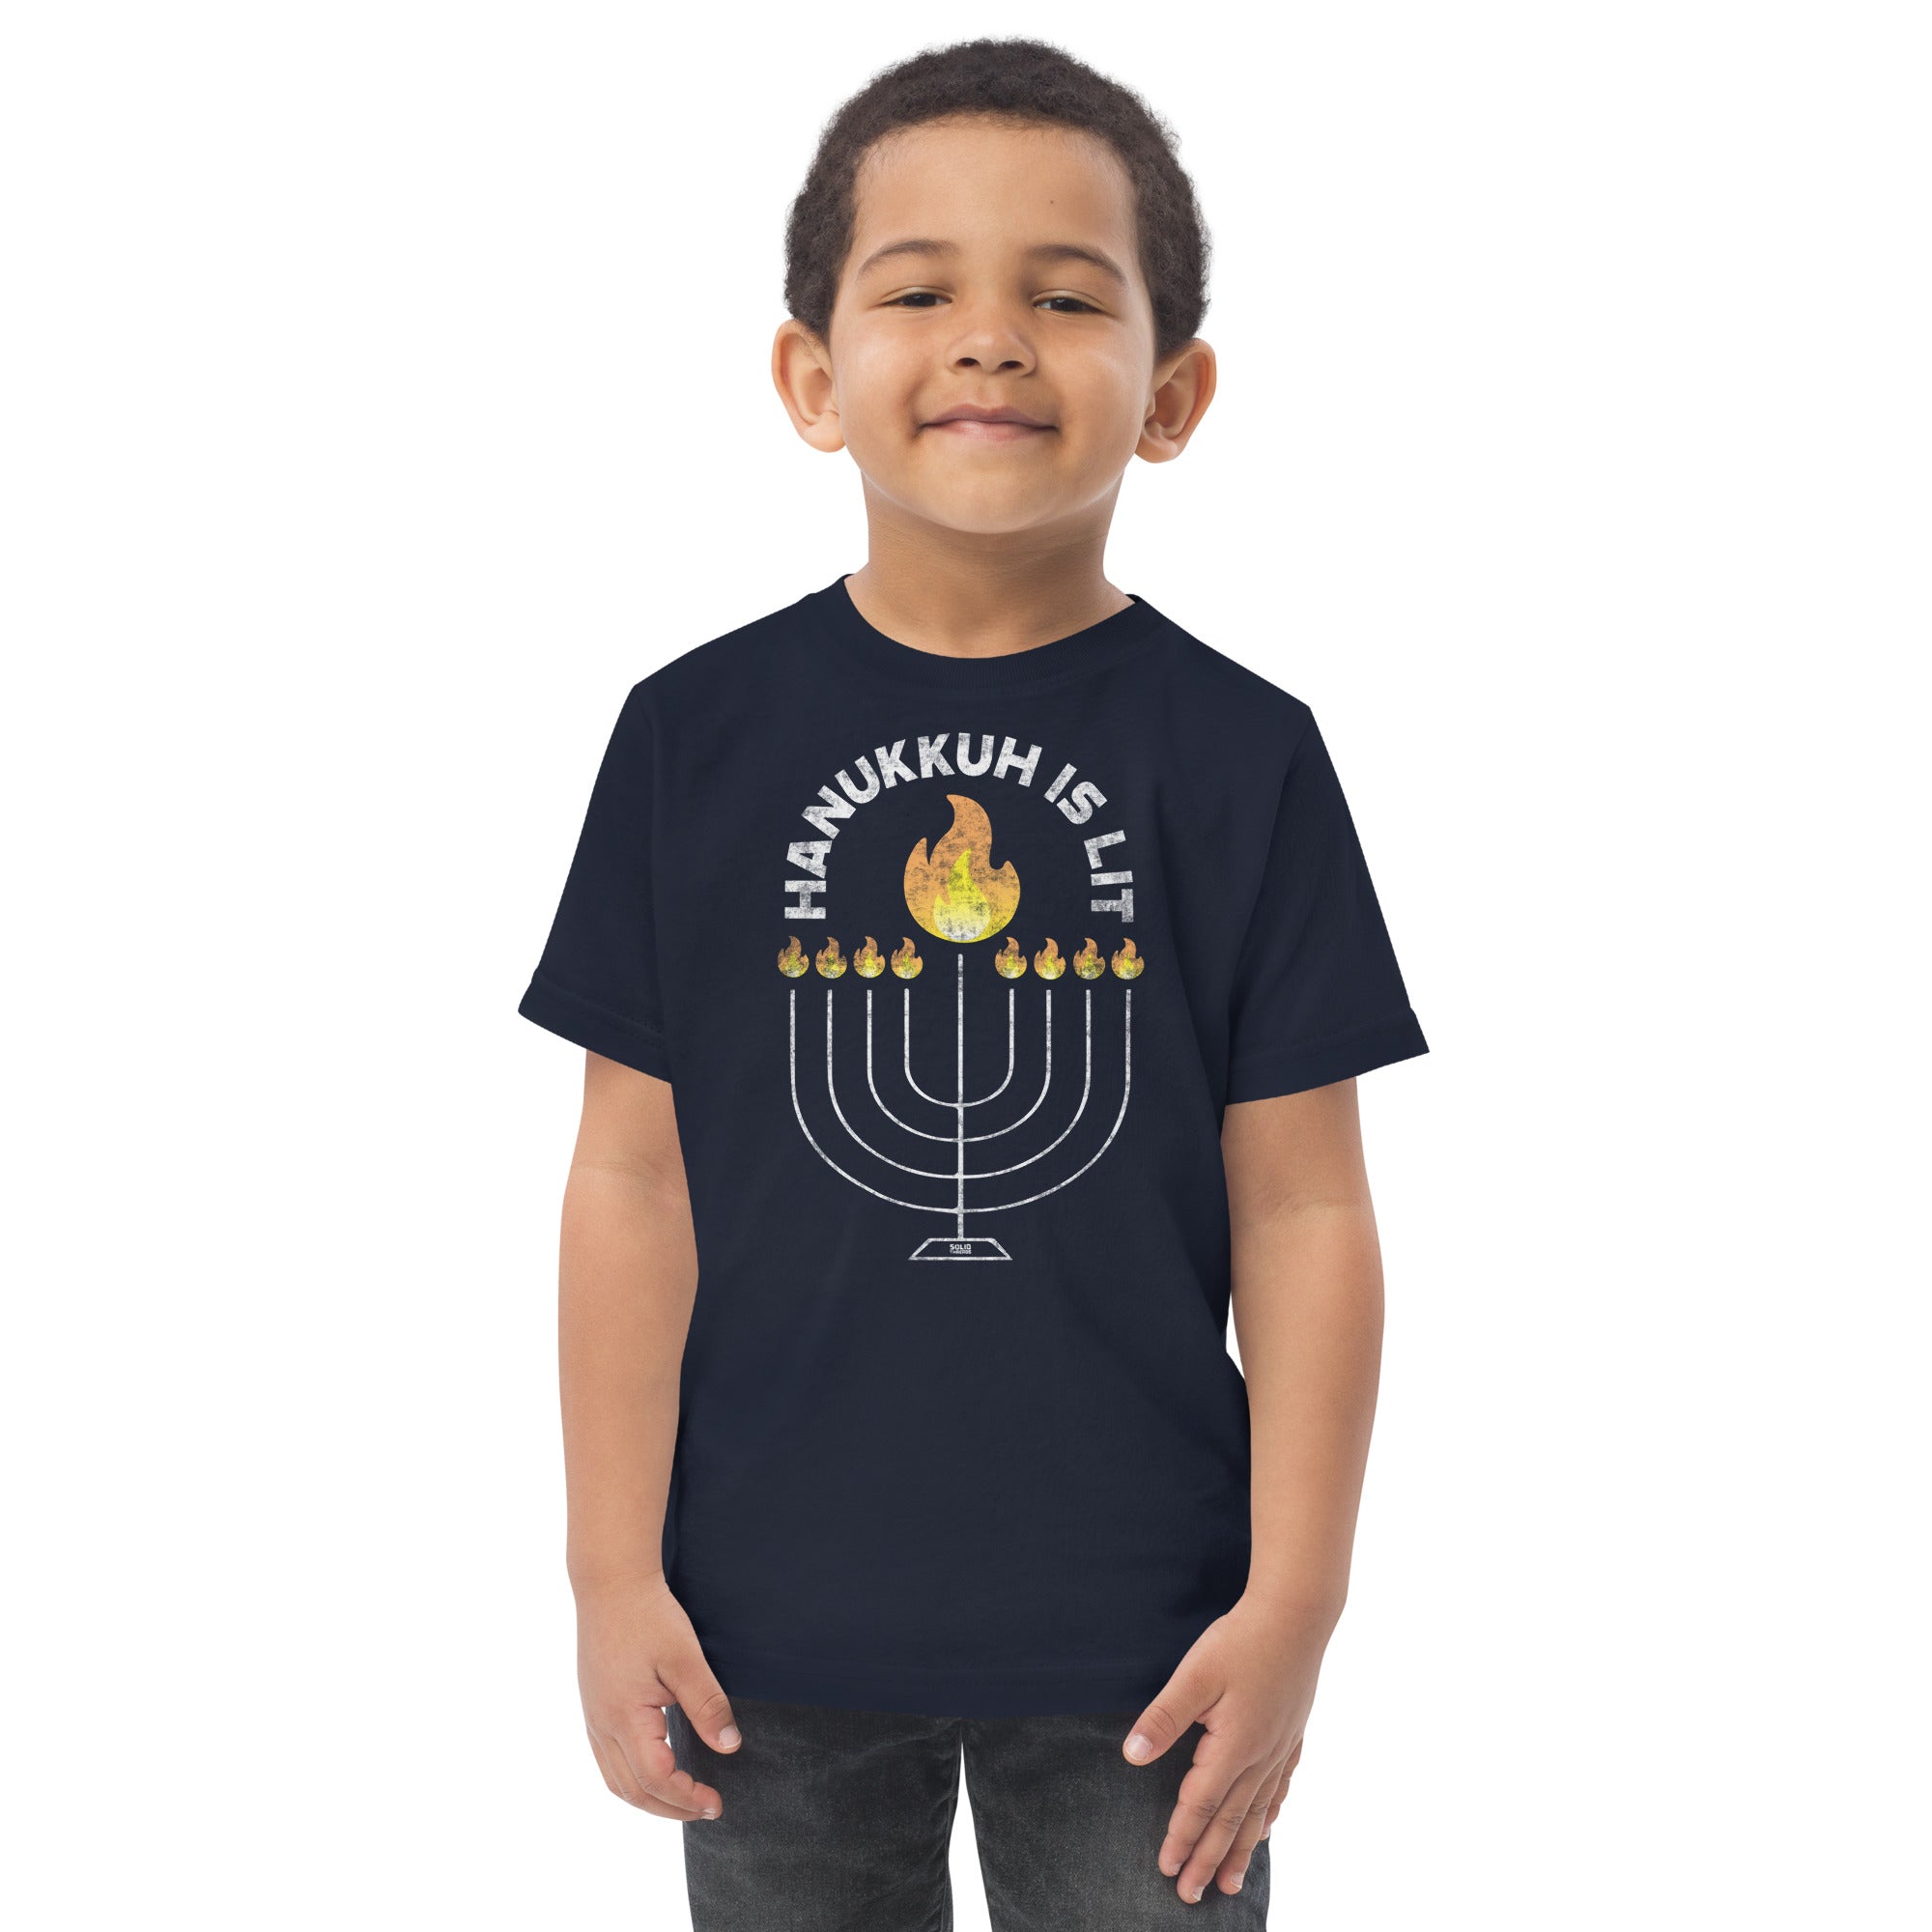 Toddler's Hanukkah Lit Cool Extra Soft T-Shirt | Retro Jewish Holiday Tee On Model | Solid Threads